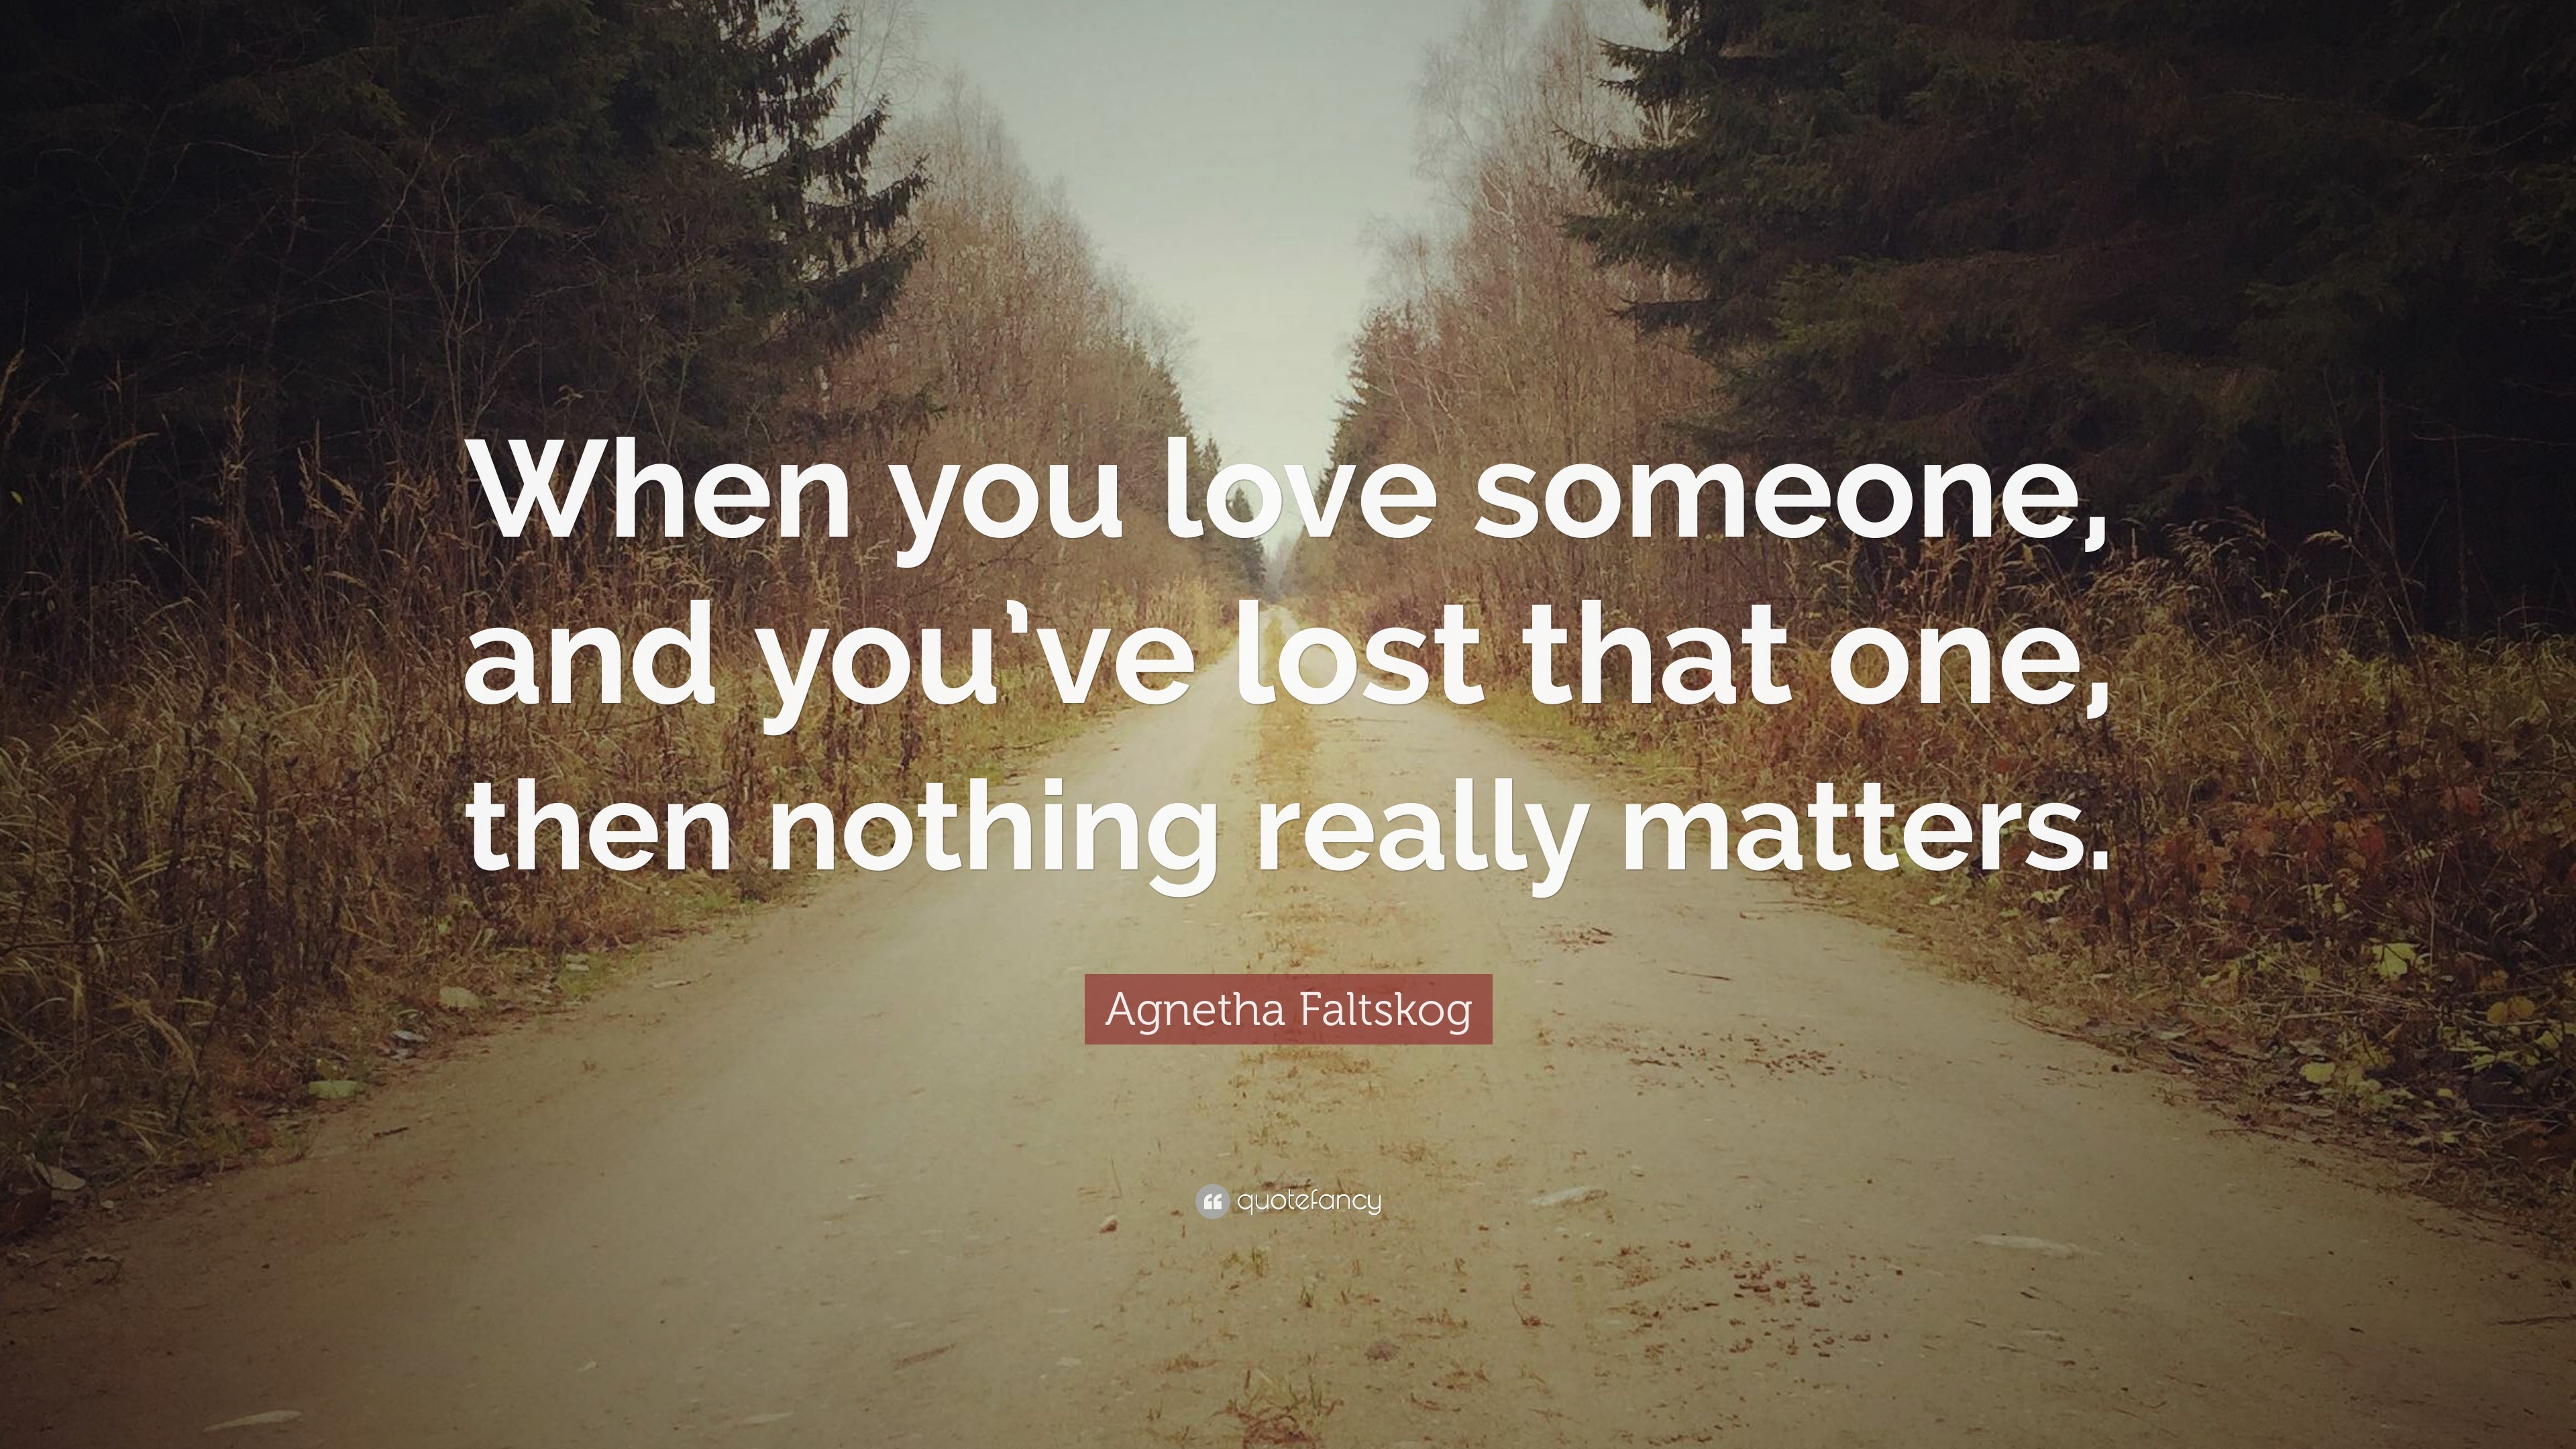 Agnetha Faltskog Quote “When you love someone and you ve lost that